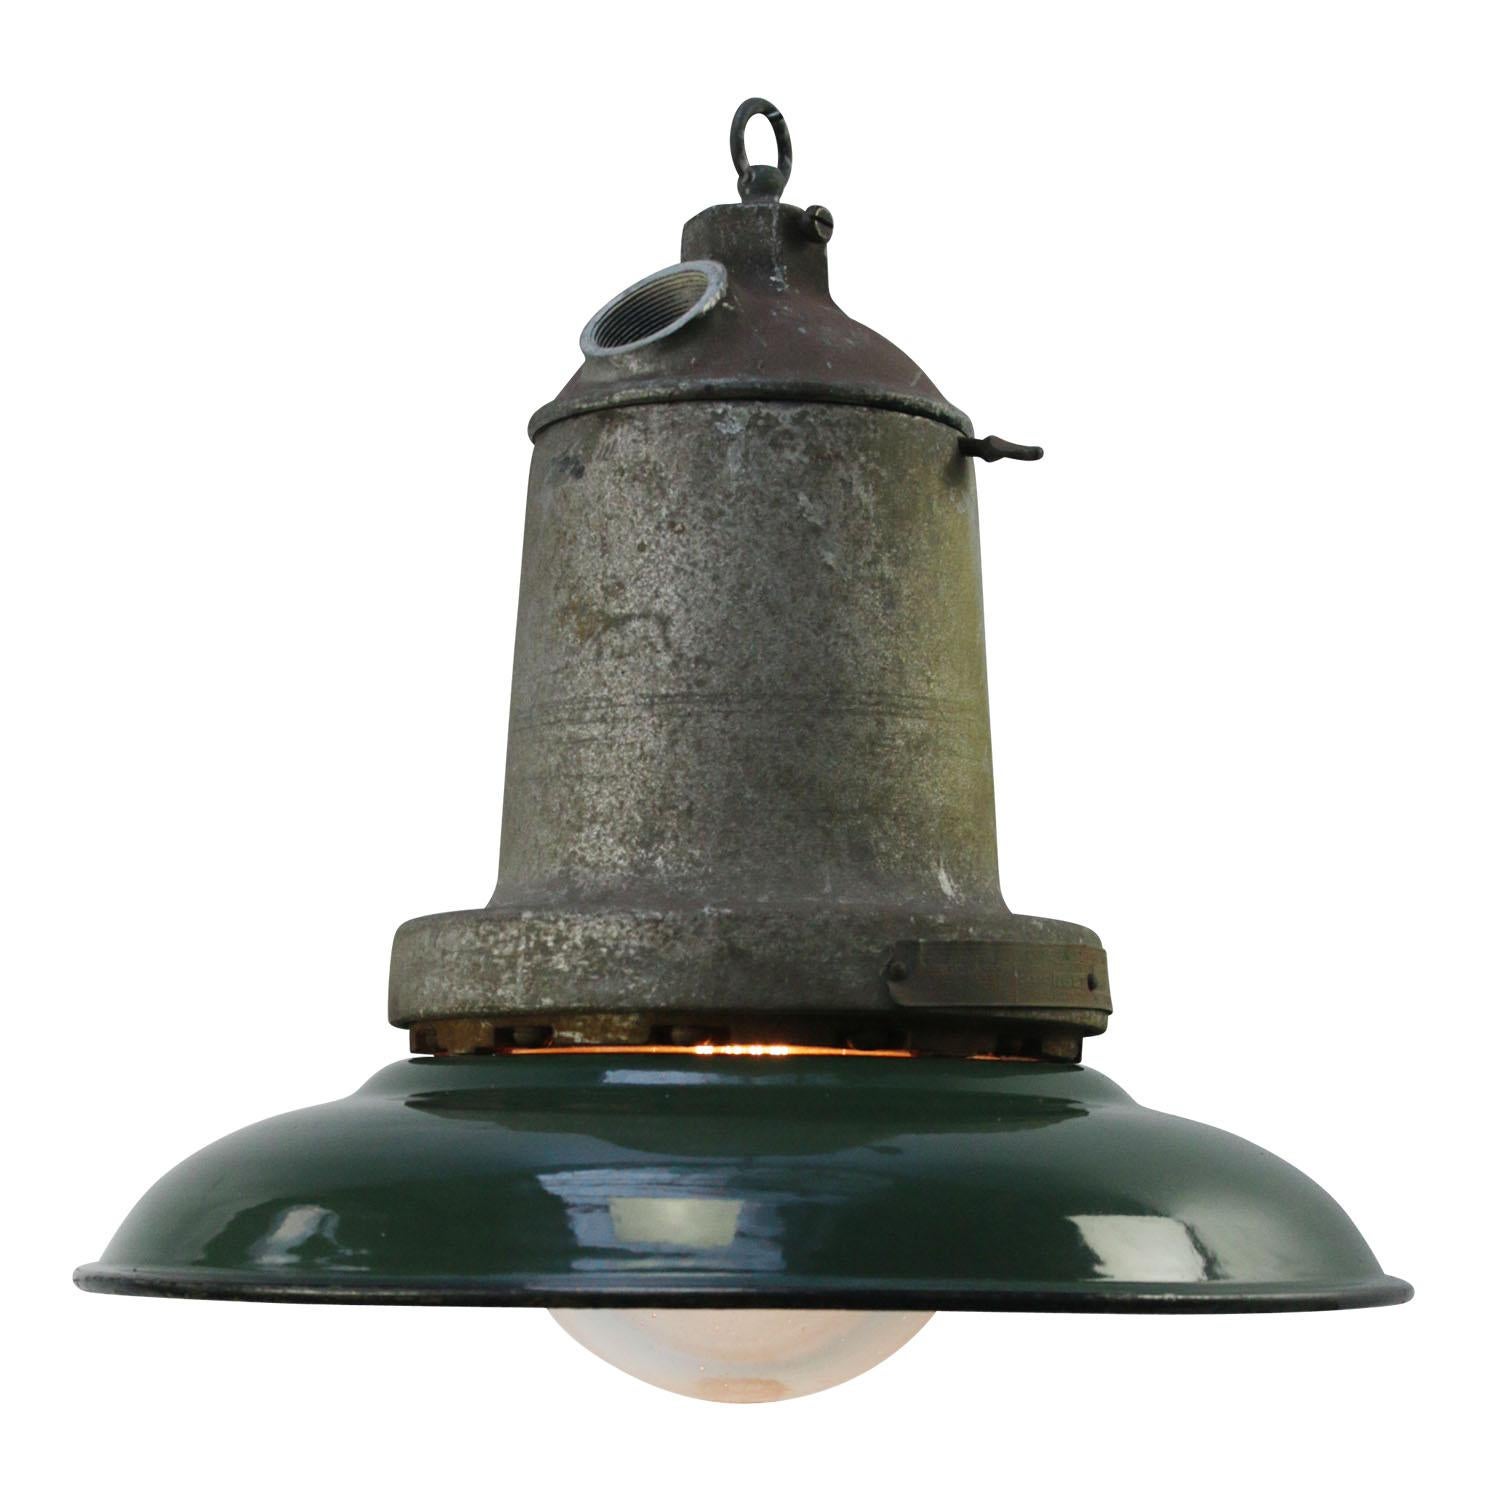 American factory pendant by van Killark Electric MFG Co . USA
Green enamel, white interior,
Cast metal top, clear glass

Weight: 13.00 kg / 28.7 lb

Priced per individual item. All lamps have been made suitable by international standards for